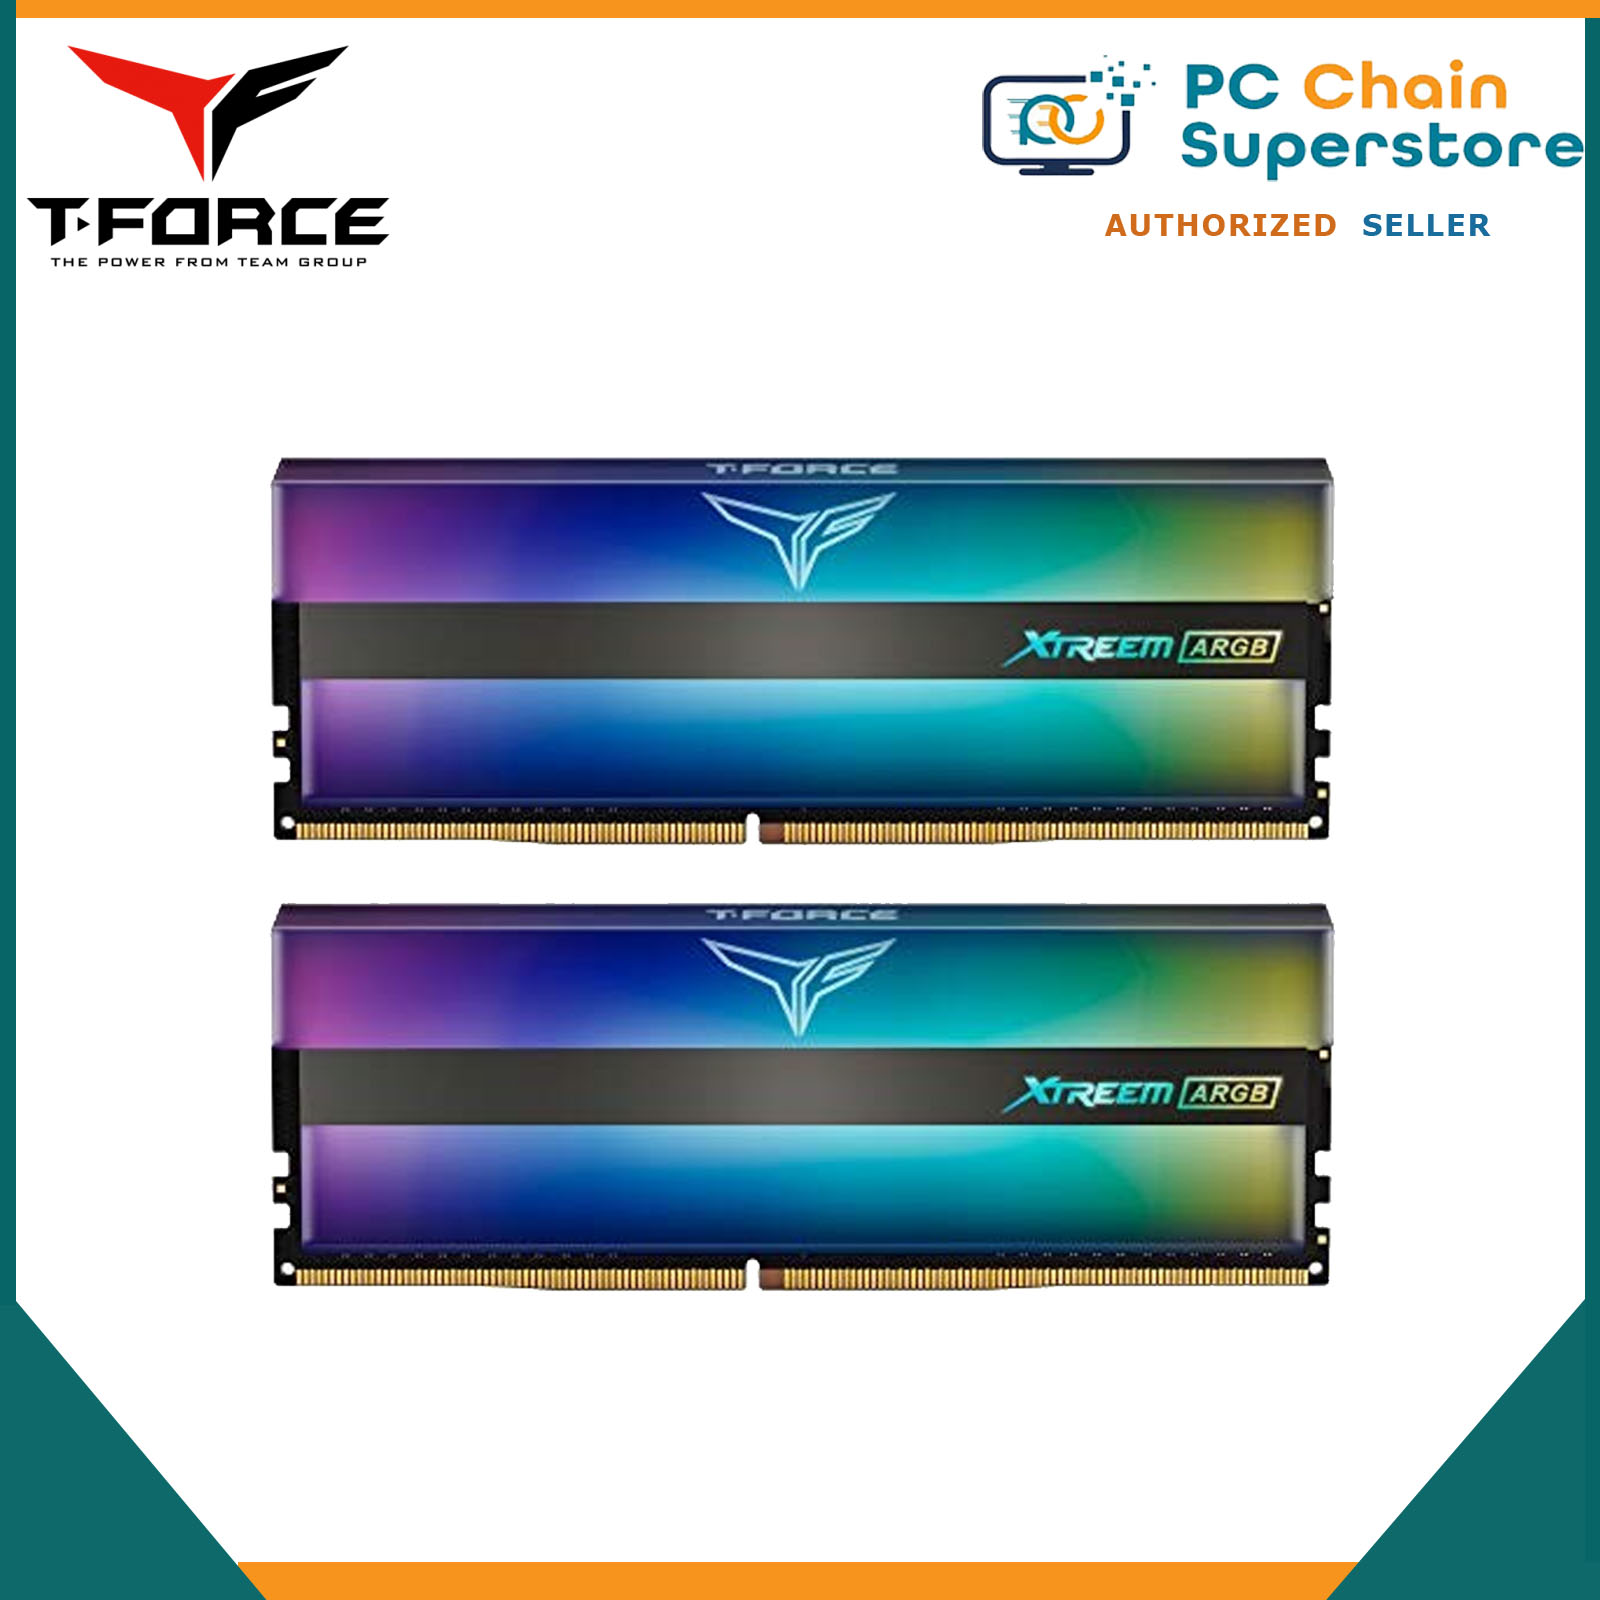 Team Group T-Force XTREEM ARGB DDR4 16GB (8GBx2) CL16 / 3600Mhz CL18 Gaming Memory RAM Compatible with ASUS AURA Sync, MSI Mystic Lights, Gigabyte RGB Fusion and ASROCK Polychrome Sync